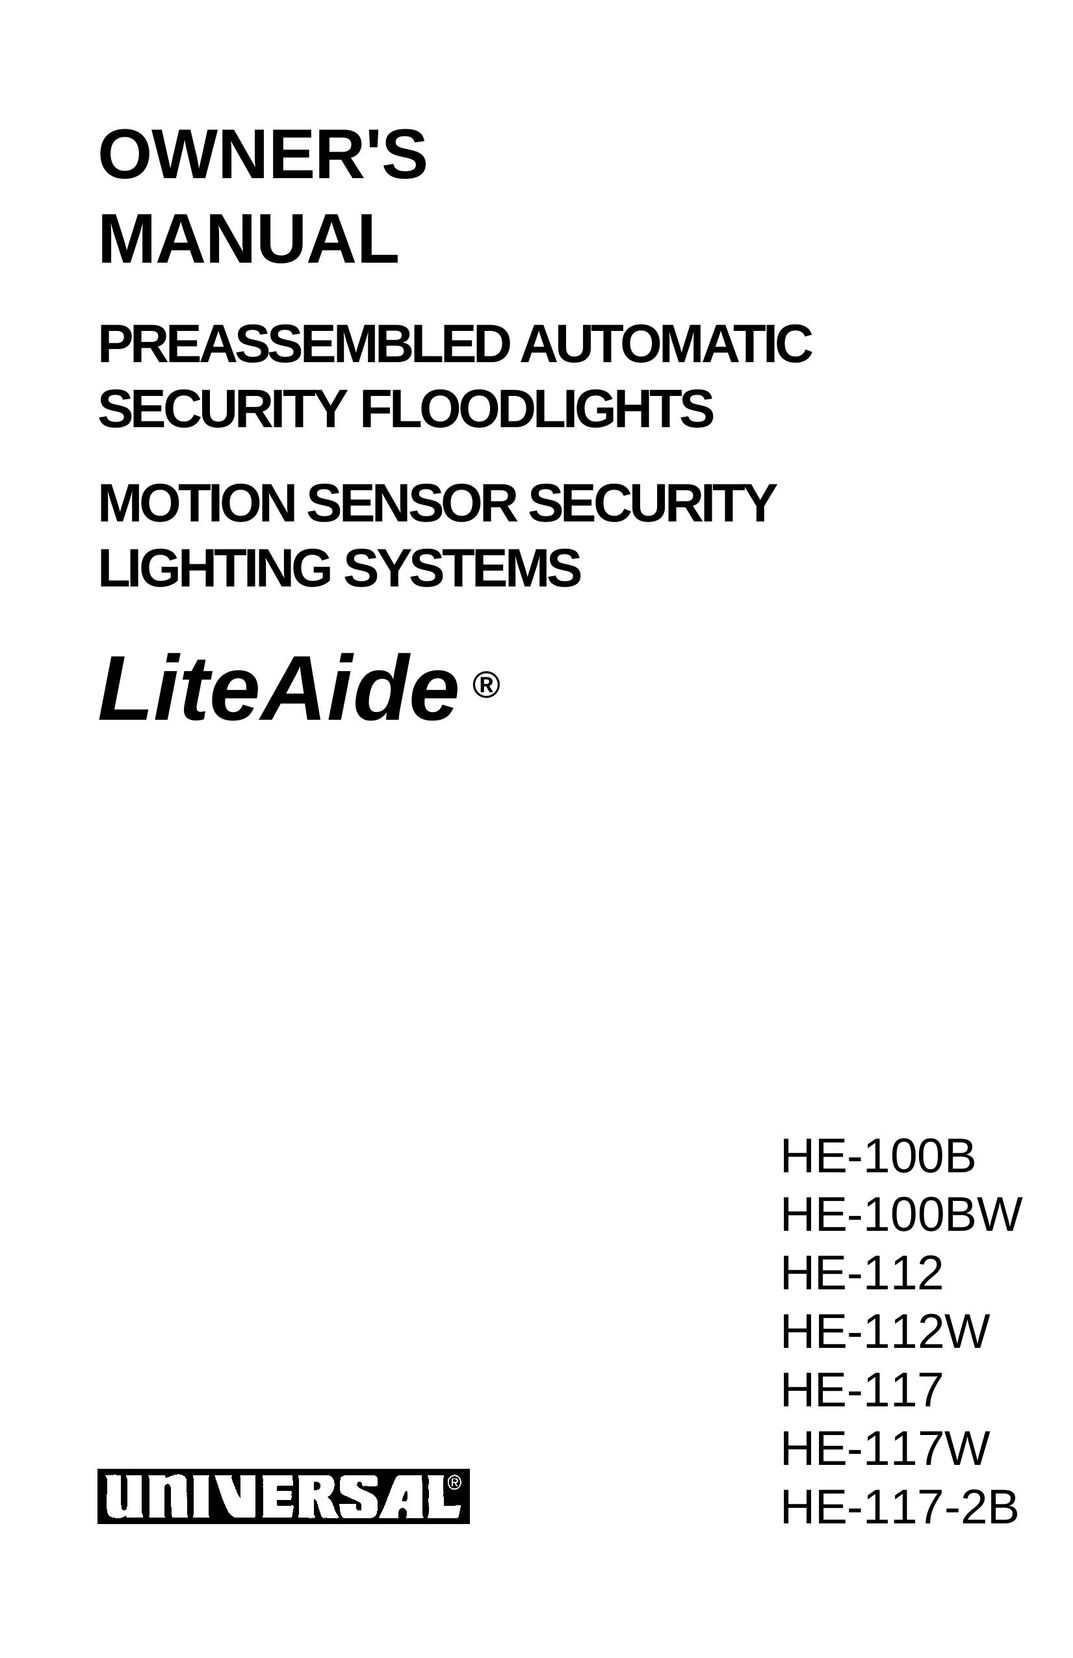 Universal HE-117-2B Home Security System User Manual